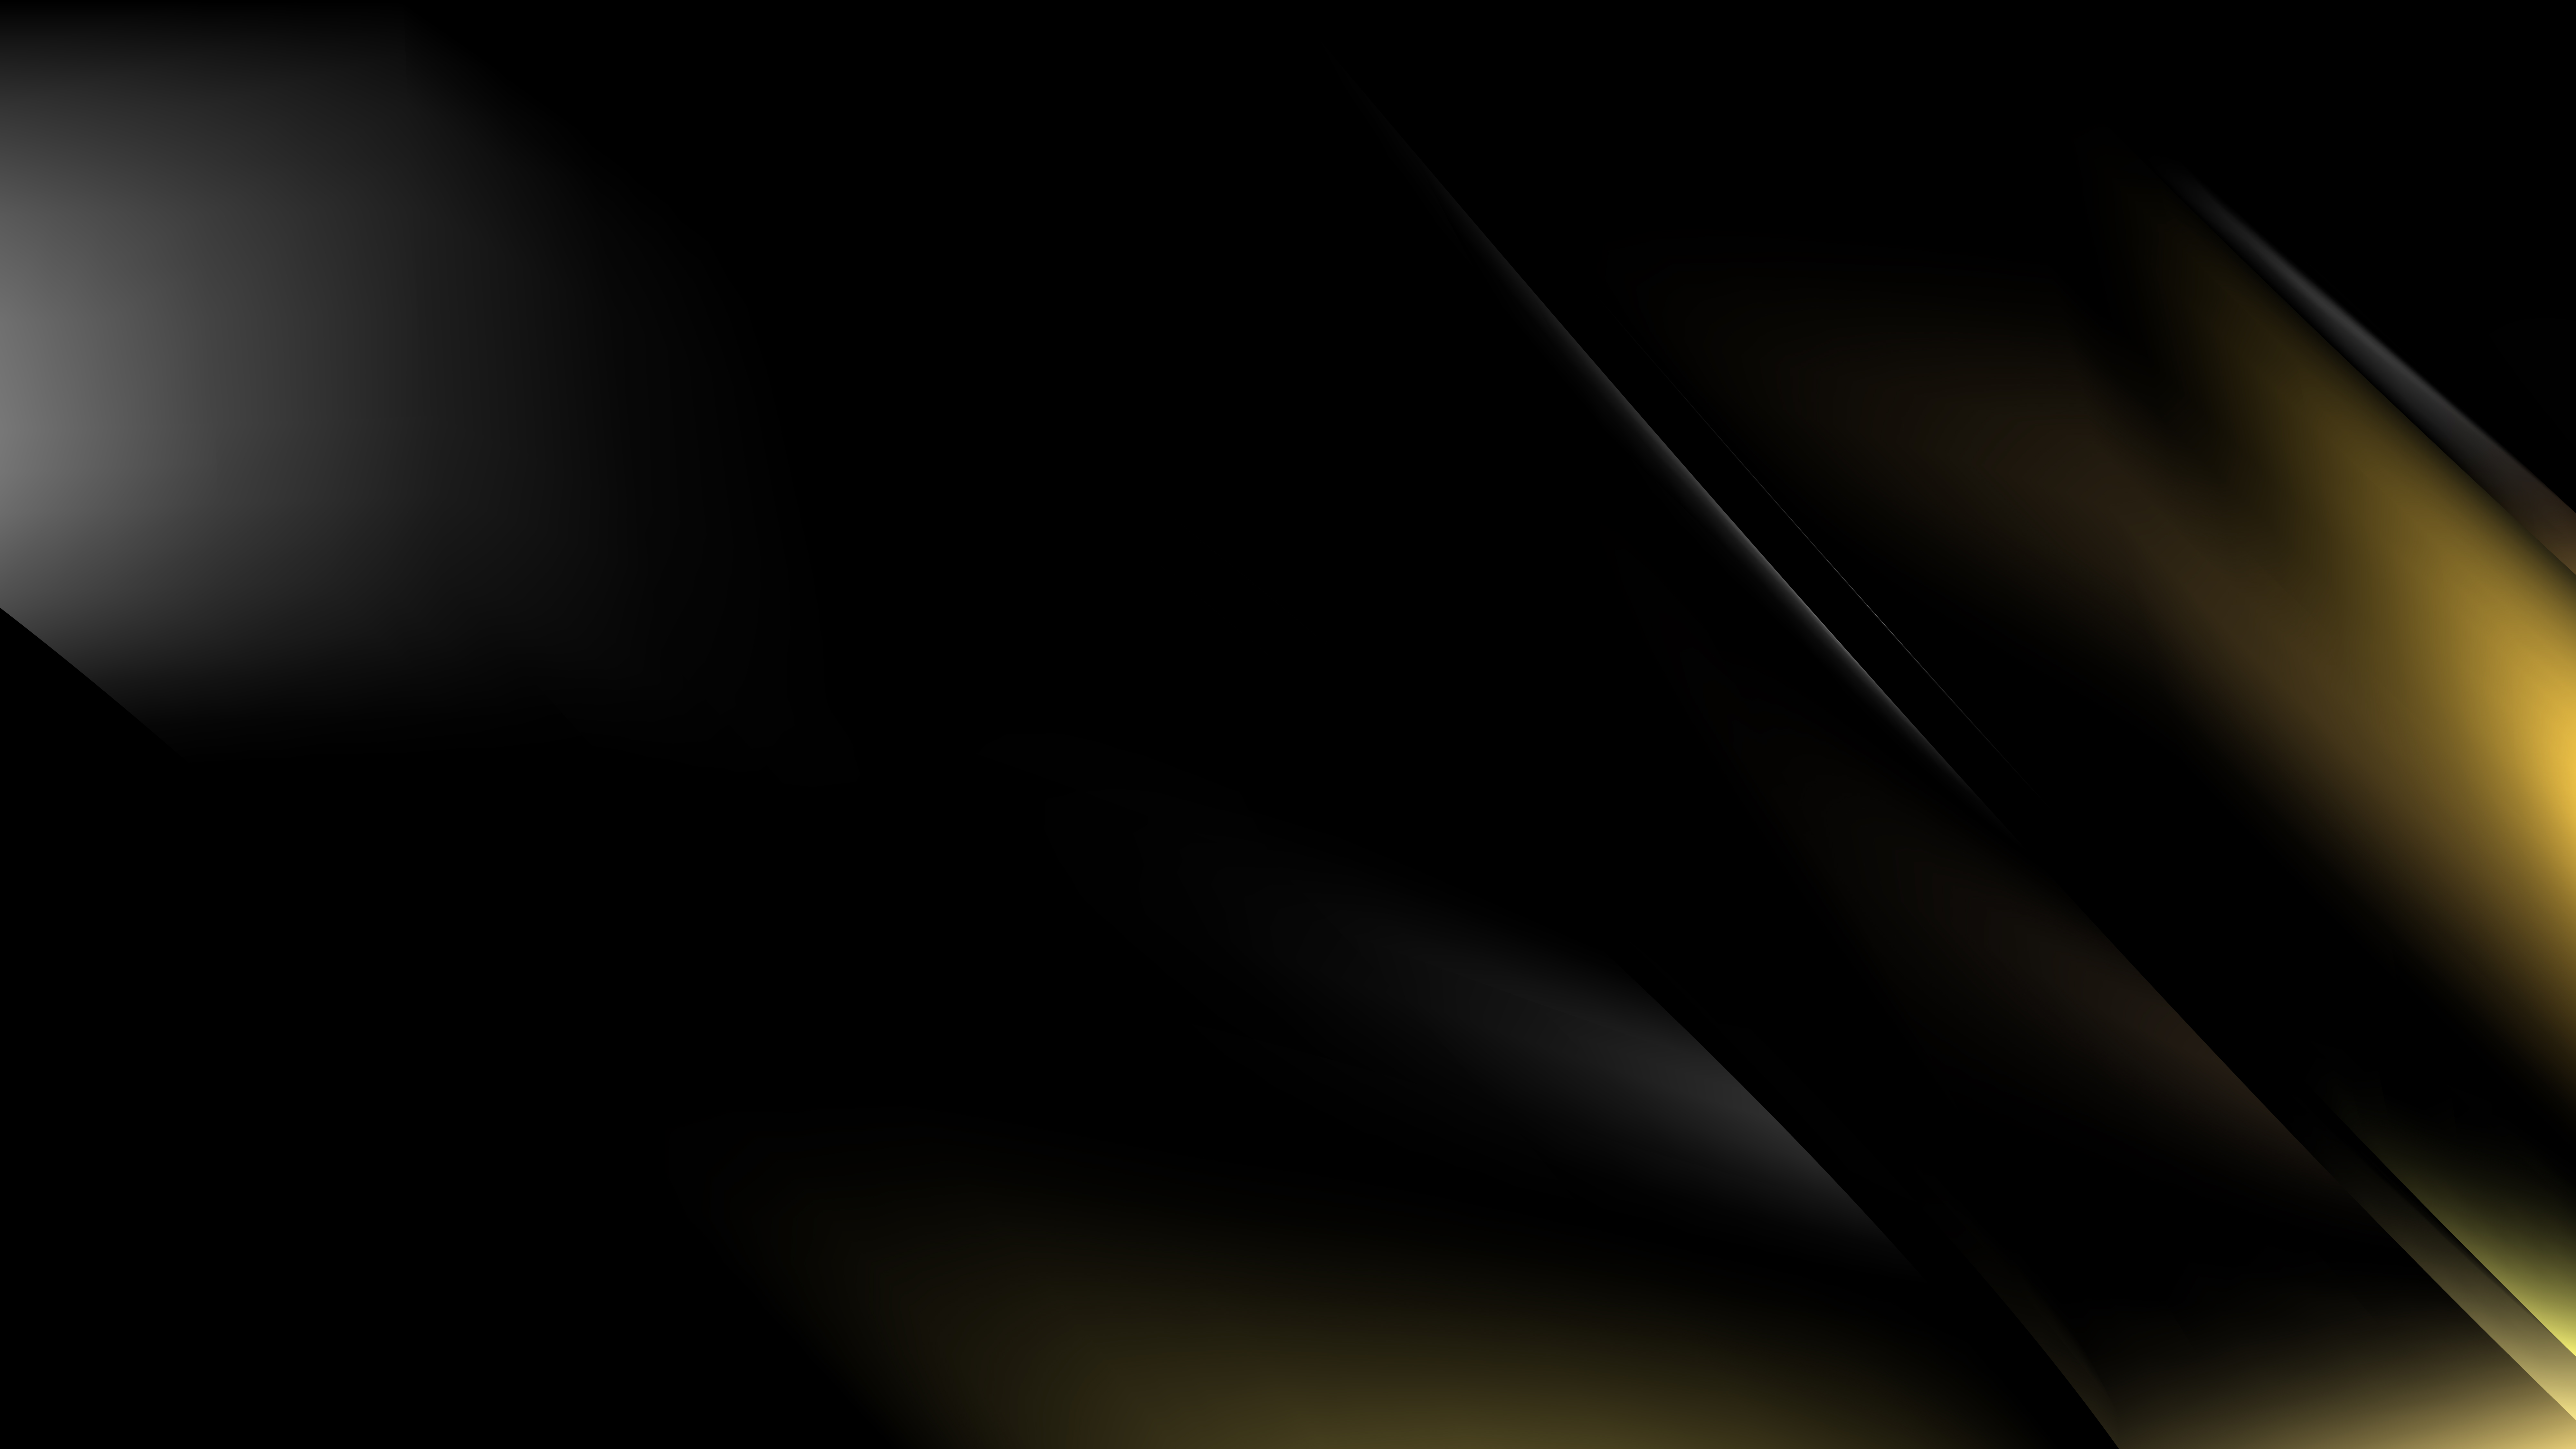 Free Black and Gold Diagonal Shiny Lines Background